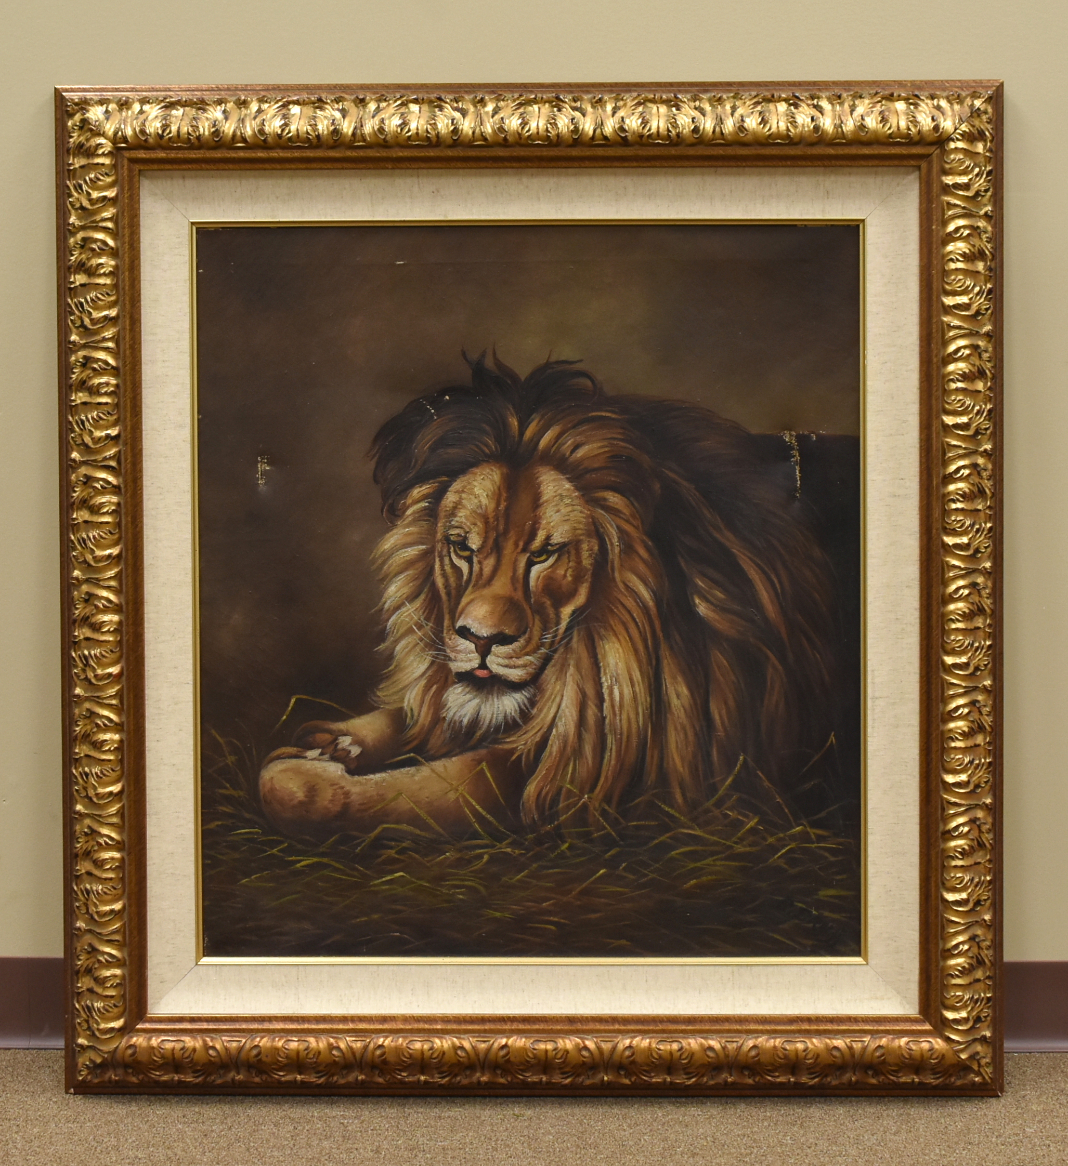 FRAMED OIL PAINTING OF A LION an 2cec81